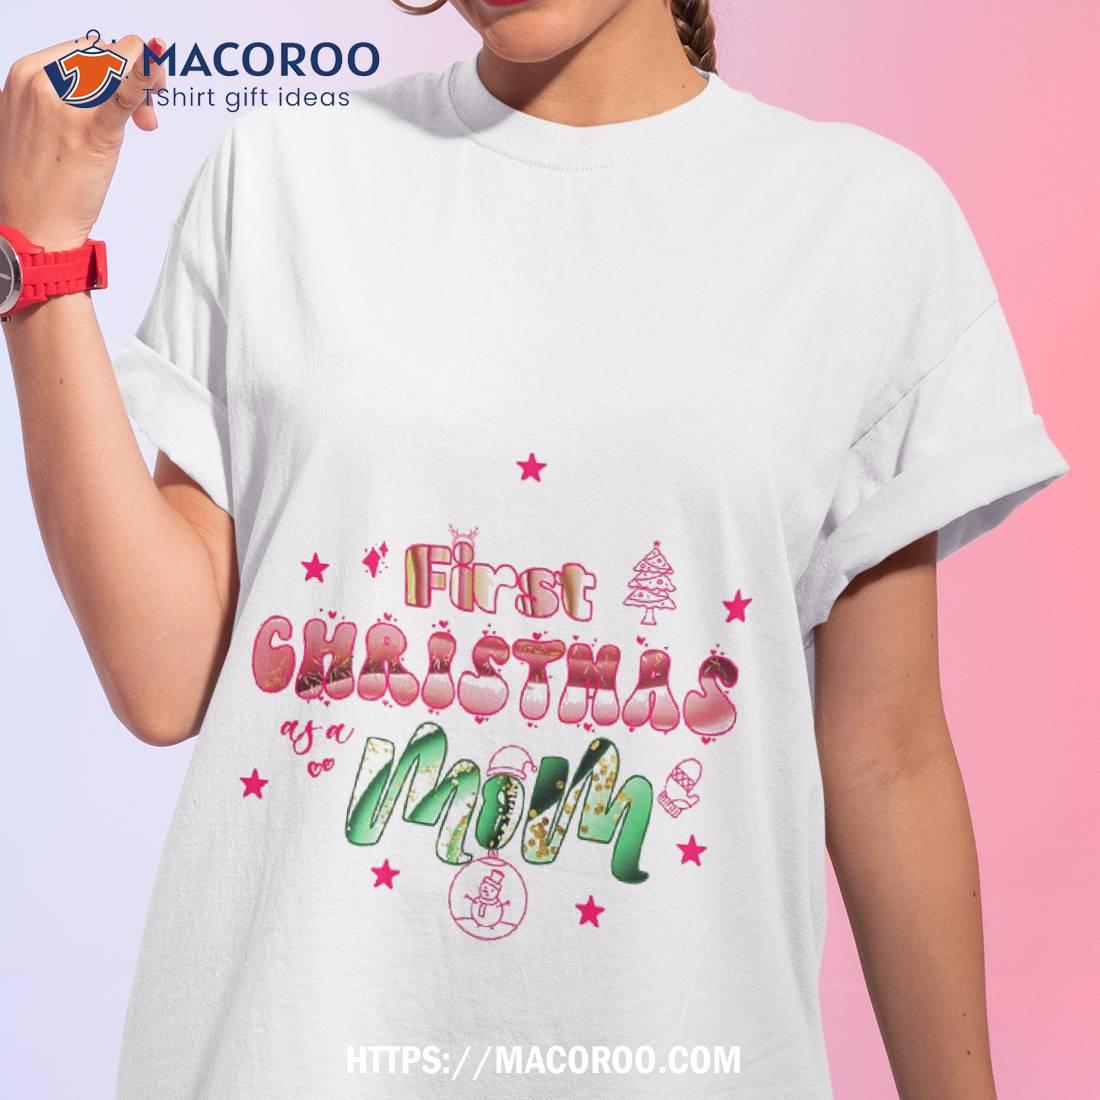 https://images.macoroo.com/wp-content/uploads/2023/08/first-christmas-as-a-mom-shirt-step-mom-gifts-for-christmas-tshirt-1.jpg